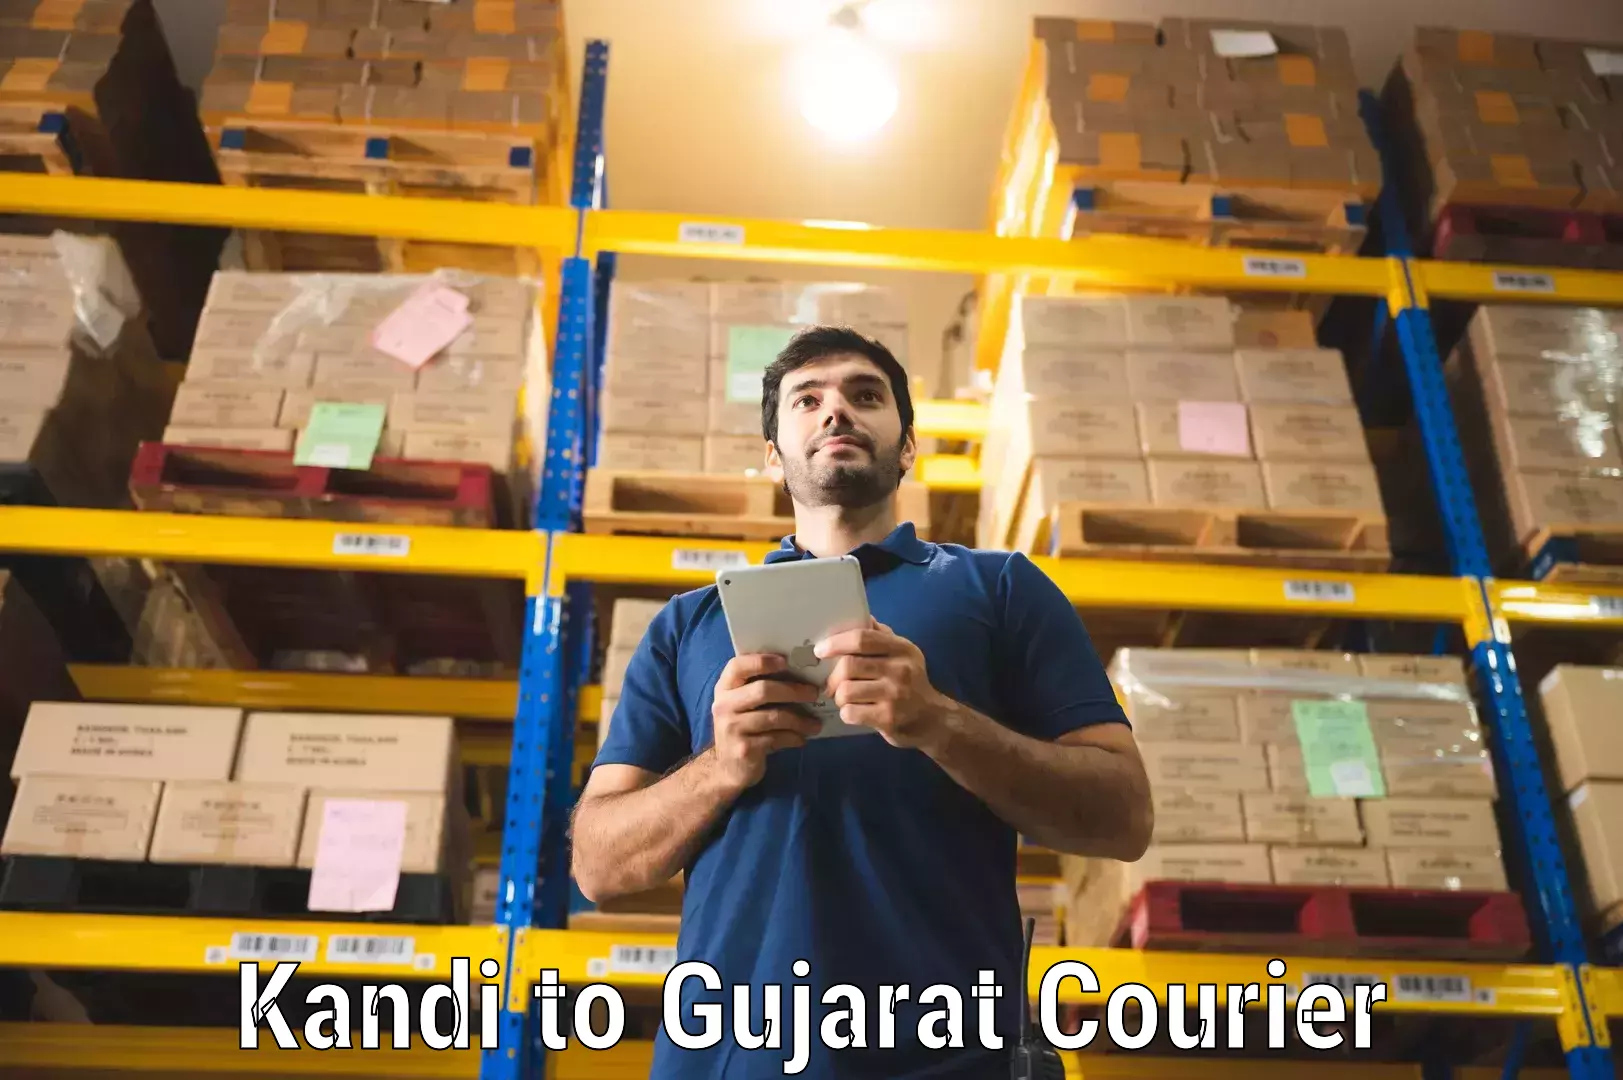 On-demand delivery Kandi to Gujarat